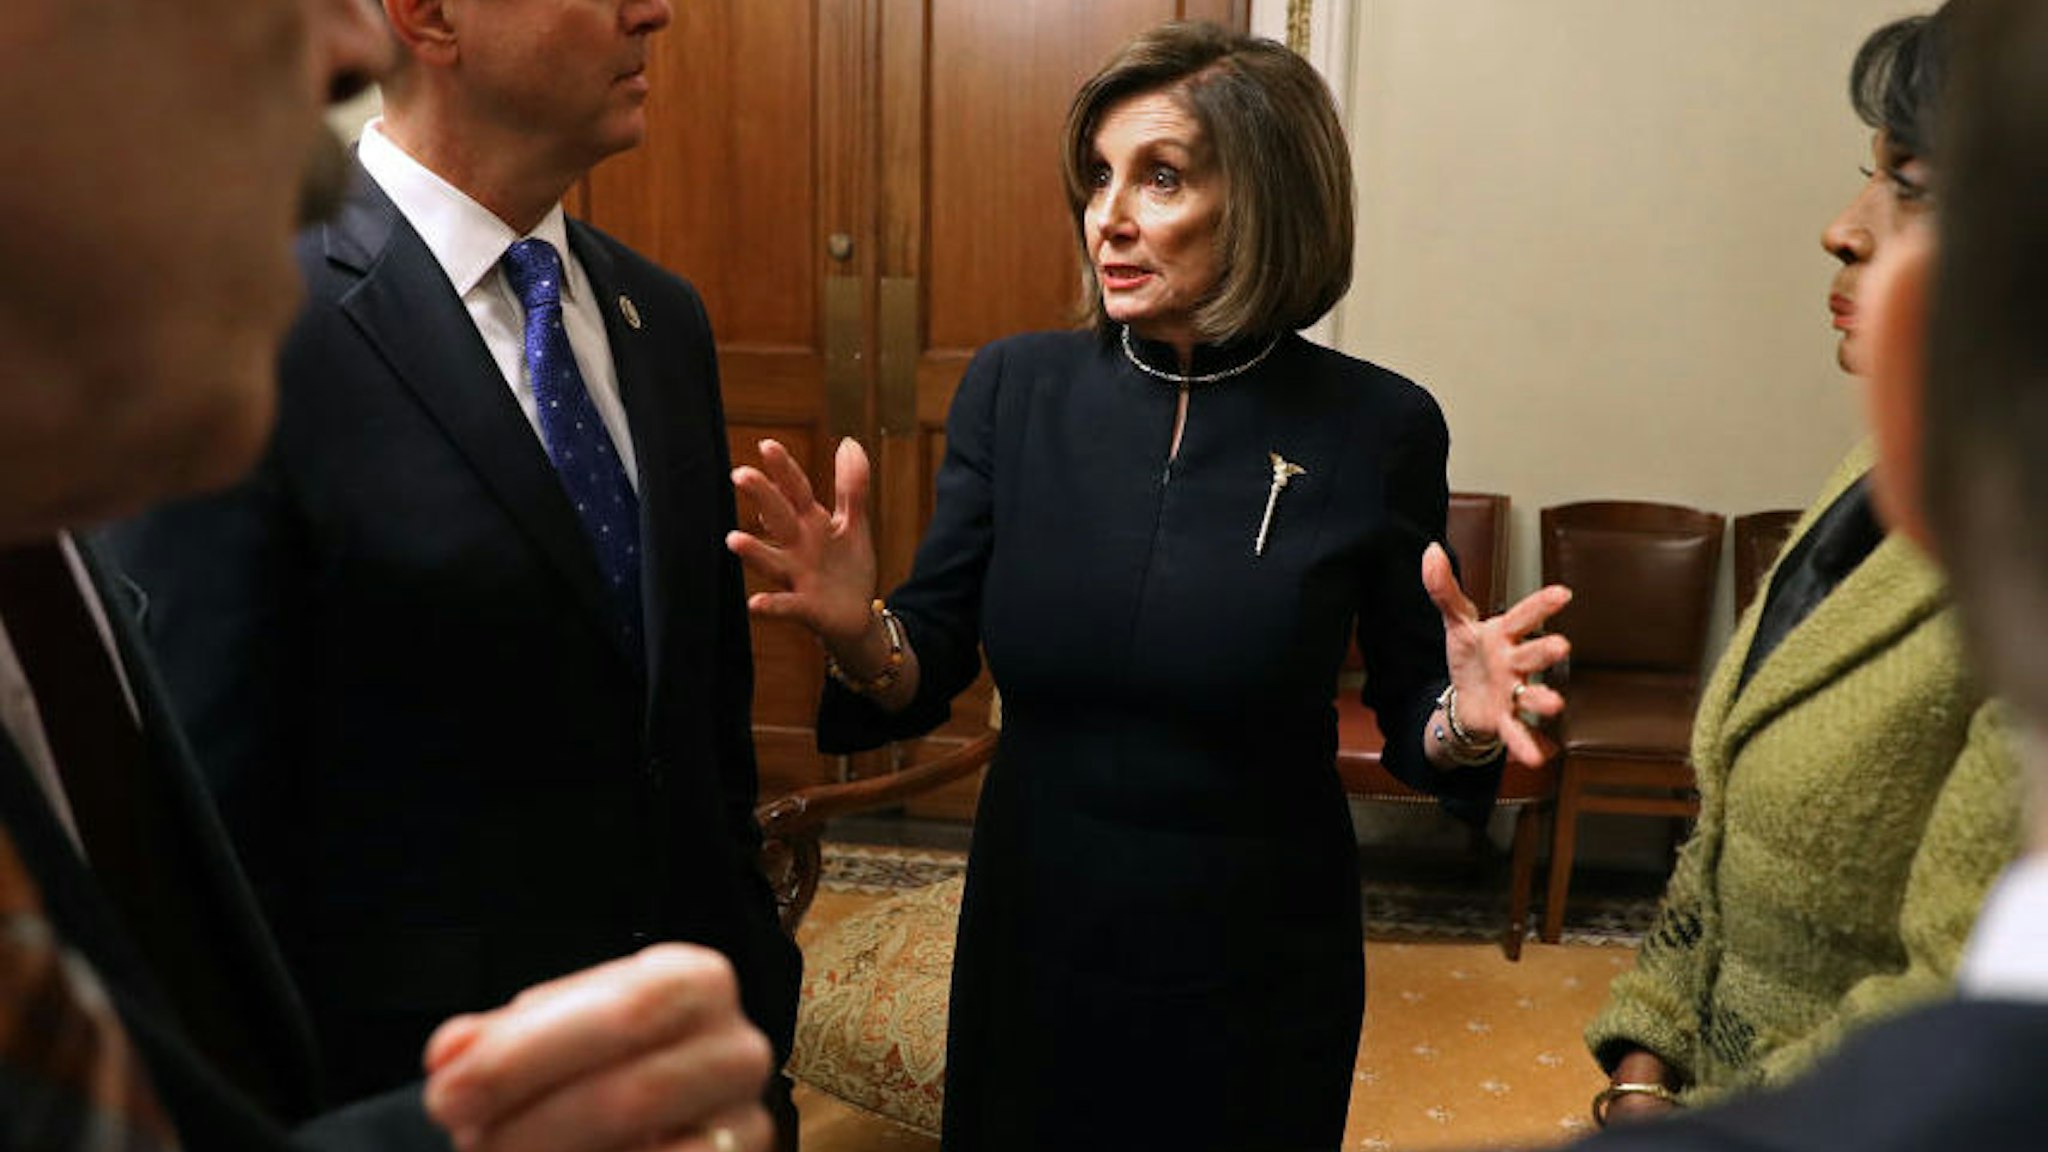 WASHINGTON, DC - DECEMBER 18: Speaker of the House Nancy Pelosi (D-CA) (C) meets with committee chairs, including Foreign Affairs Committee Chairman Eliot Engel (D-NY) (L) and Intelligence Committee Chairman Adam Schiff (D-CA) immediately following votes on articles of impeachment of U.S. President Donald Trump in Pelosi's ceremonial office at the U.S. Capitol December 18, 2019 in Washington, DC. The U.S. House of Representatives voted to successfully pass two articles of impeachment against President Donald Trump on charges of abuse of power and obstruction of Congress.